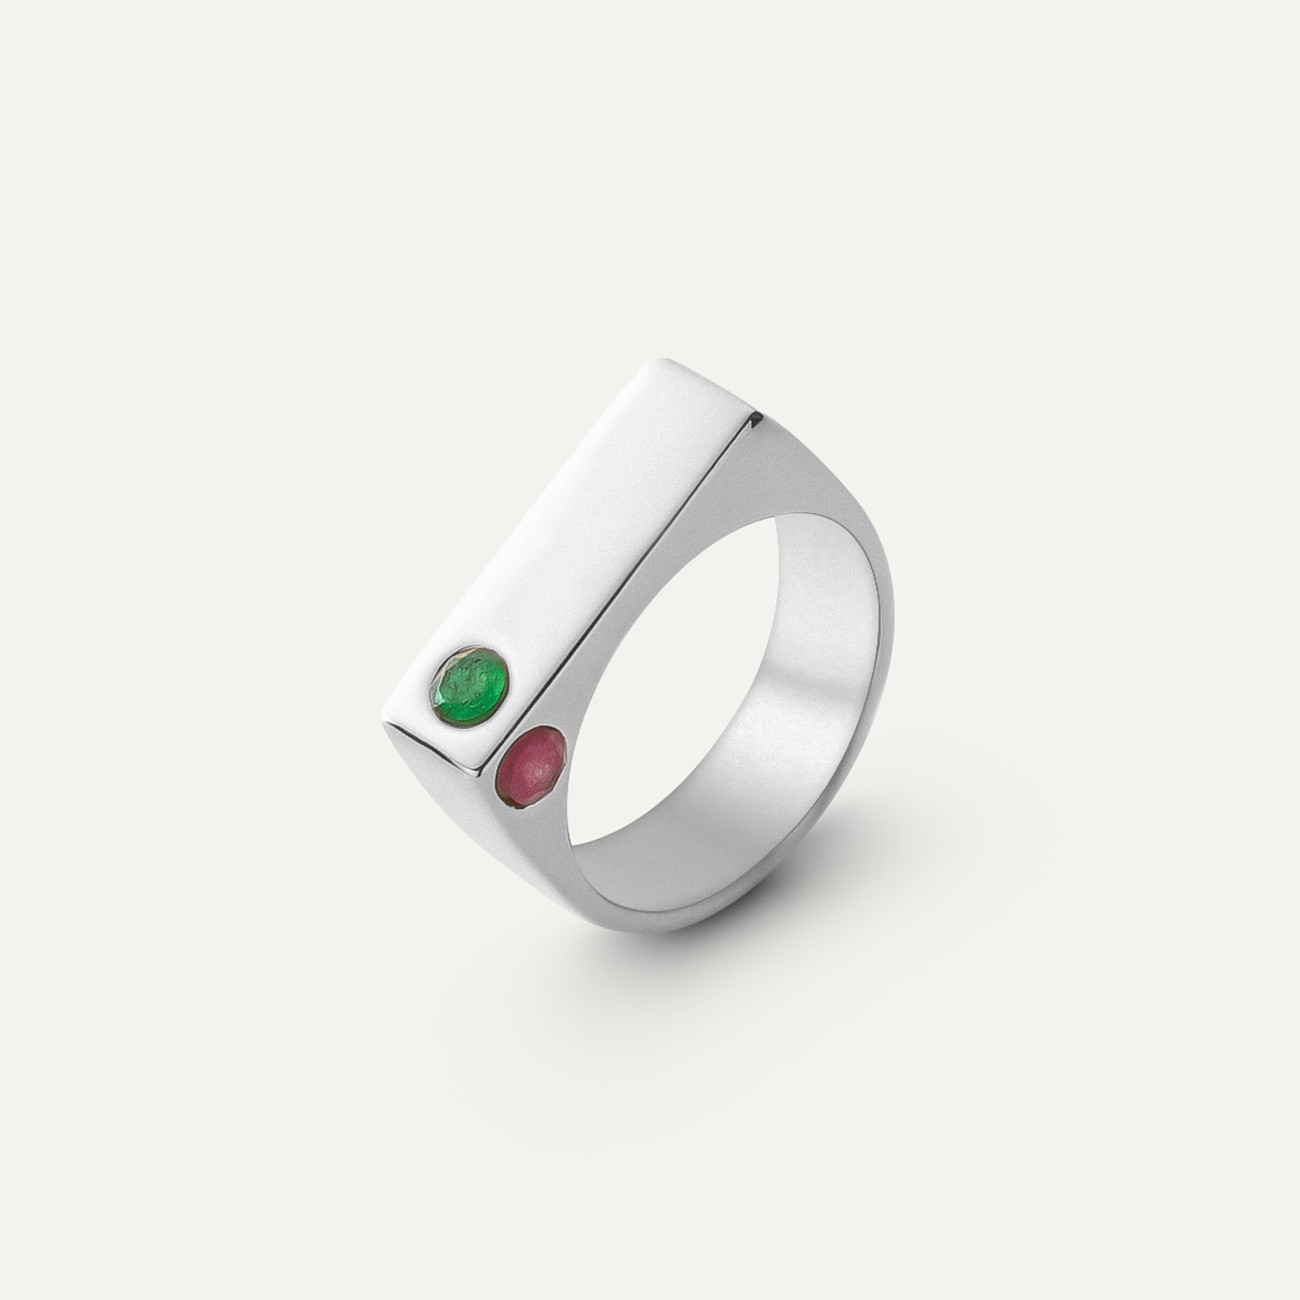 Rectangle ring with a colorful stones